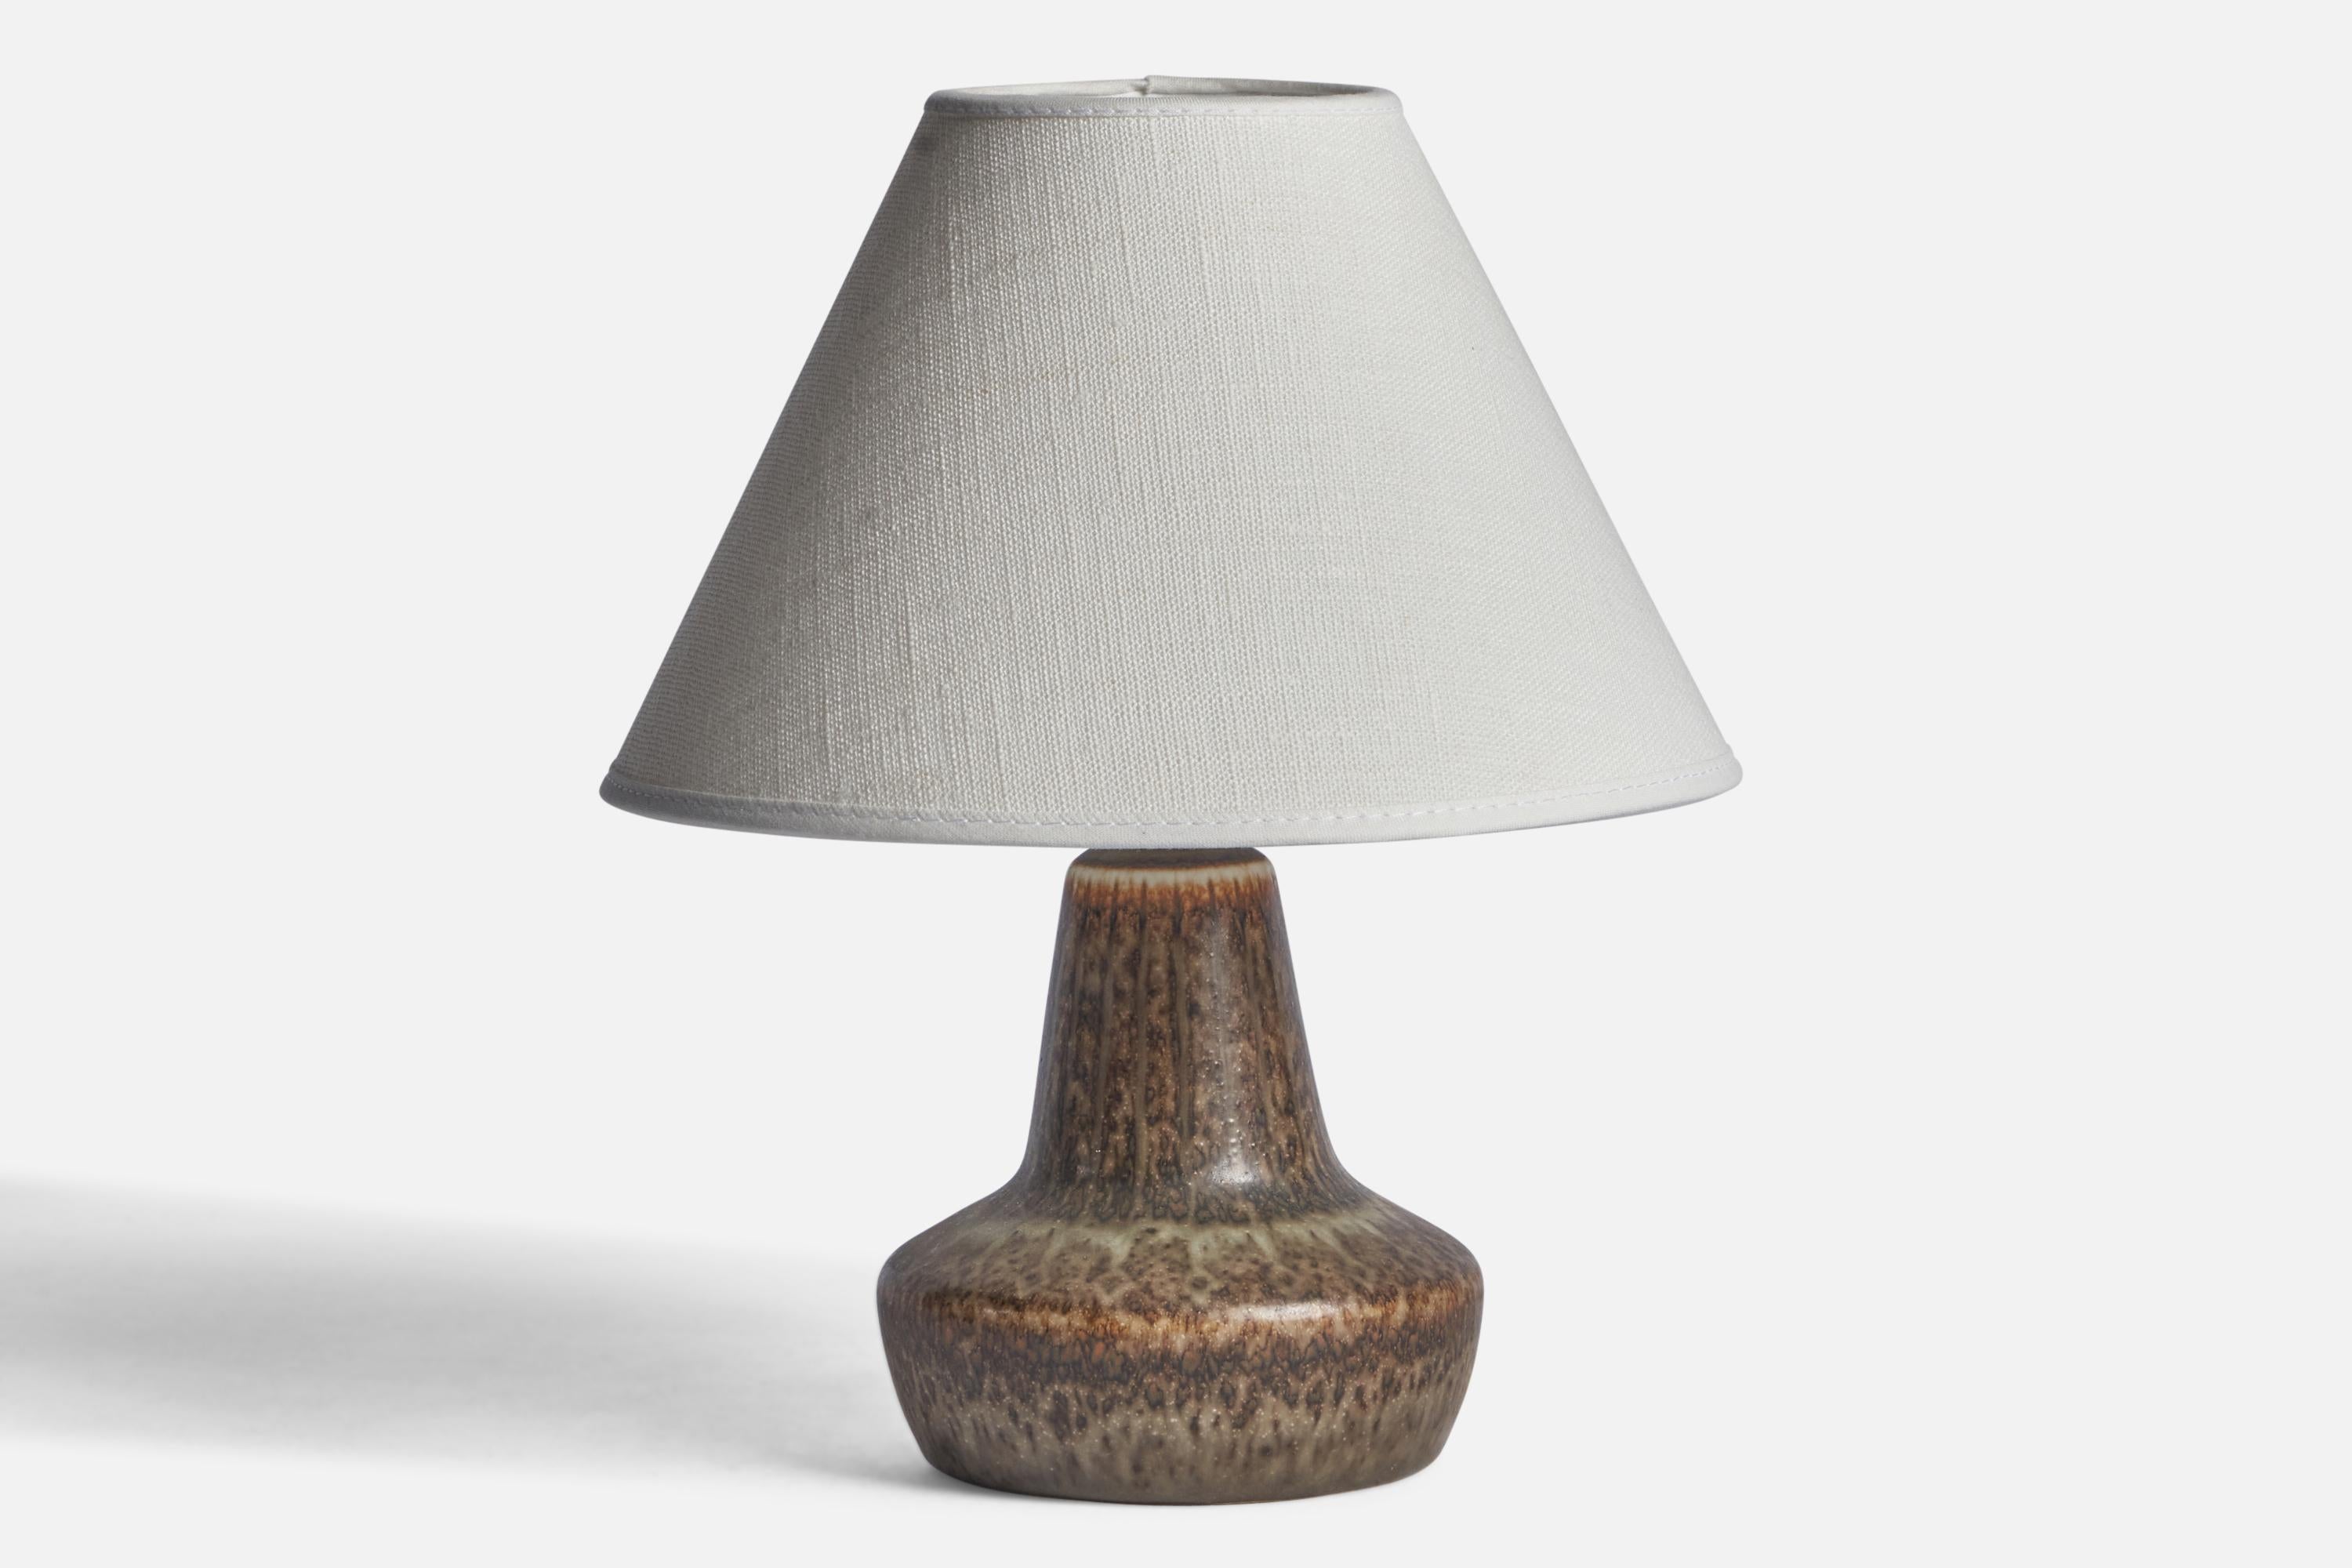 A brown-glazed stoneware table lamp designed by Gunnar Nylund and produced by Rörstrand, Sweden, 1940s.

Dimensions of Lamp (inches): 7” H x 4.3” Diameter
Dimensions of Shade (inches): 3” Top Diameter x 8” Bottom Diameter x 5” H 
Dimensions of Lamp